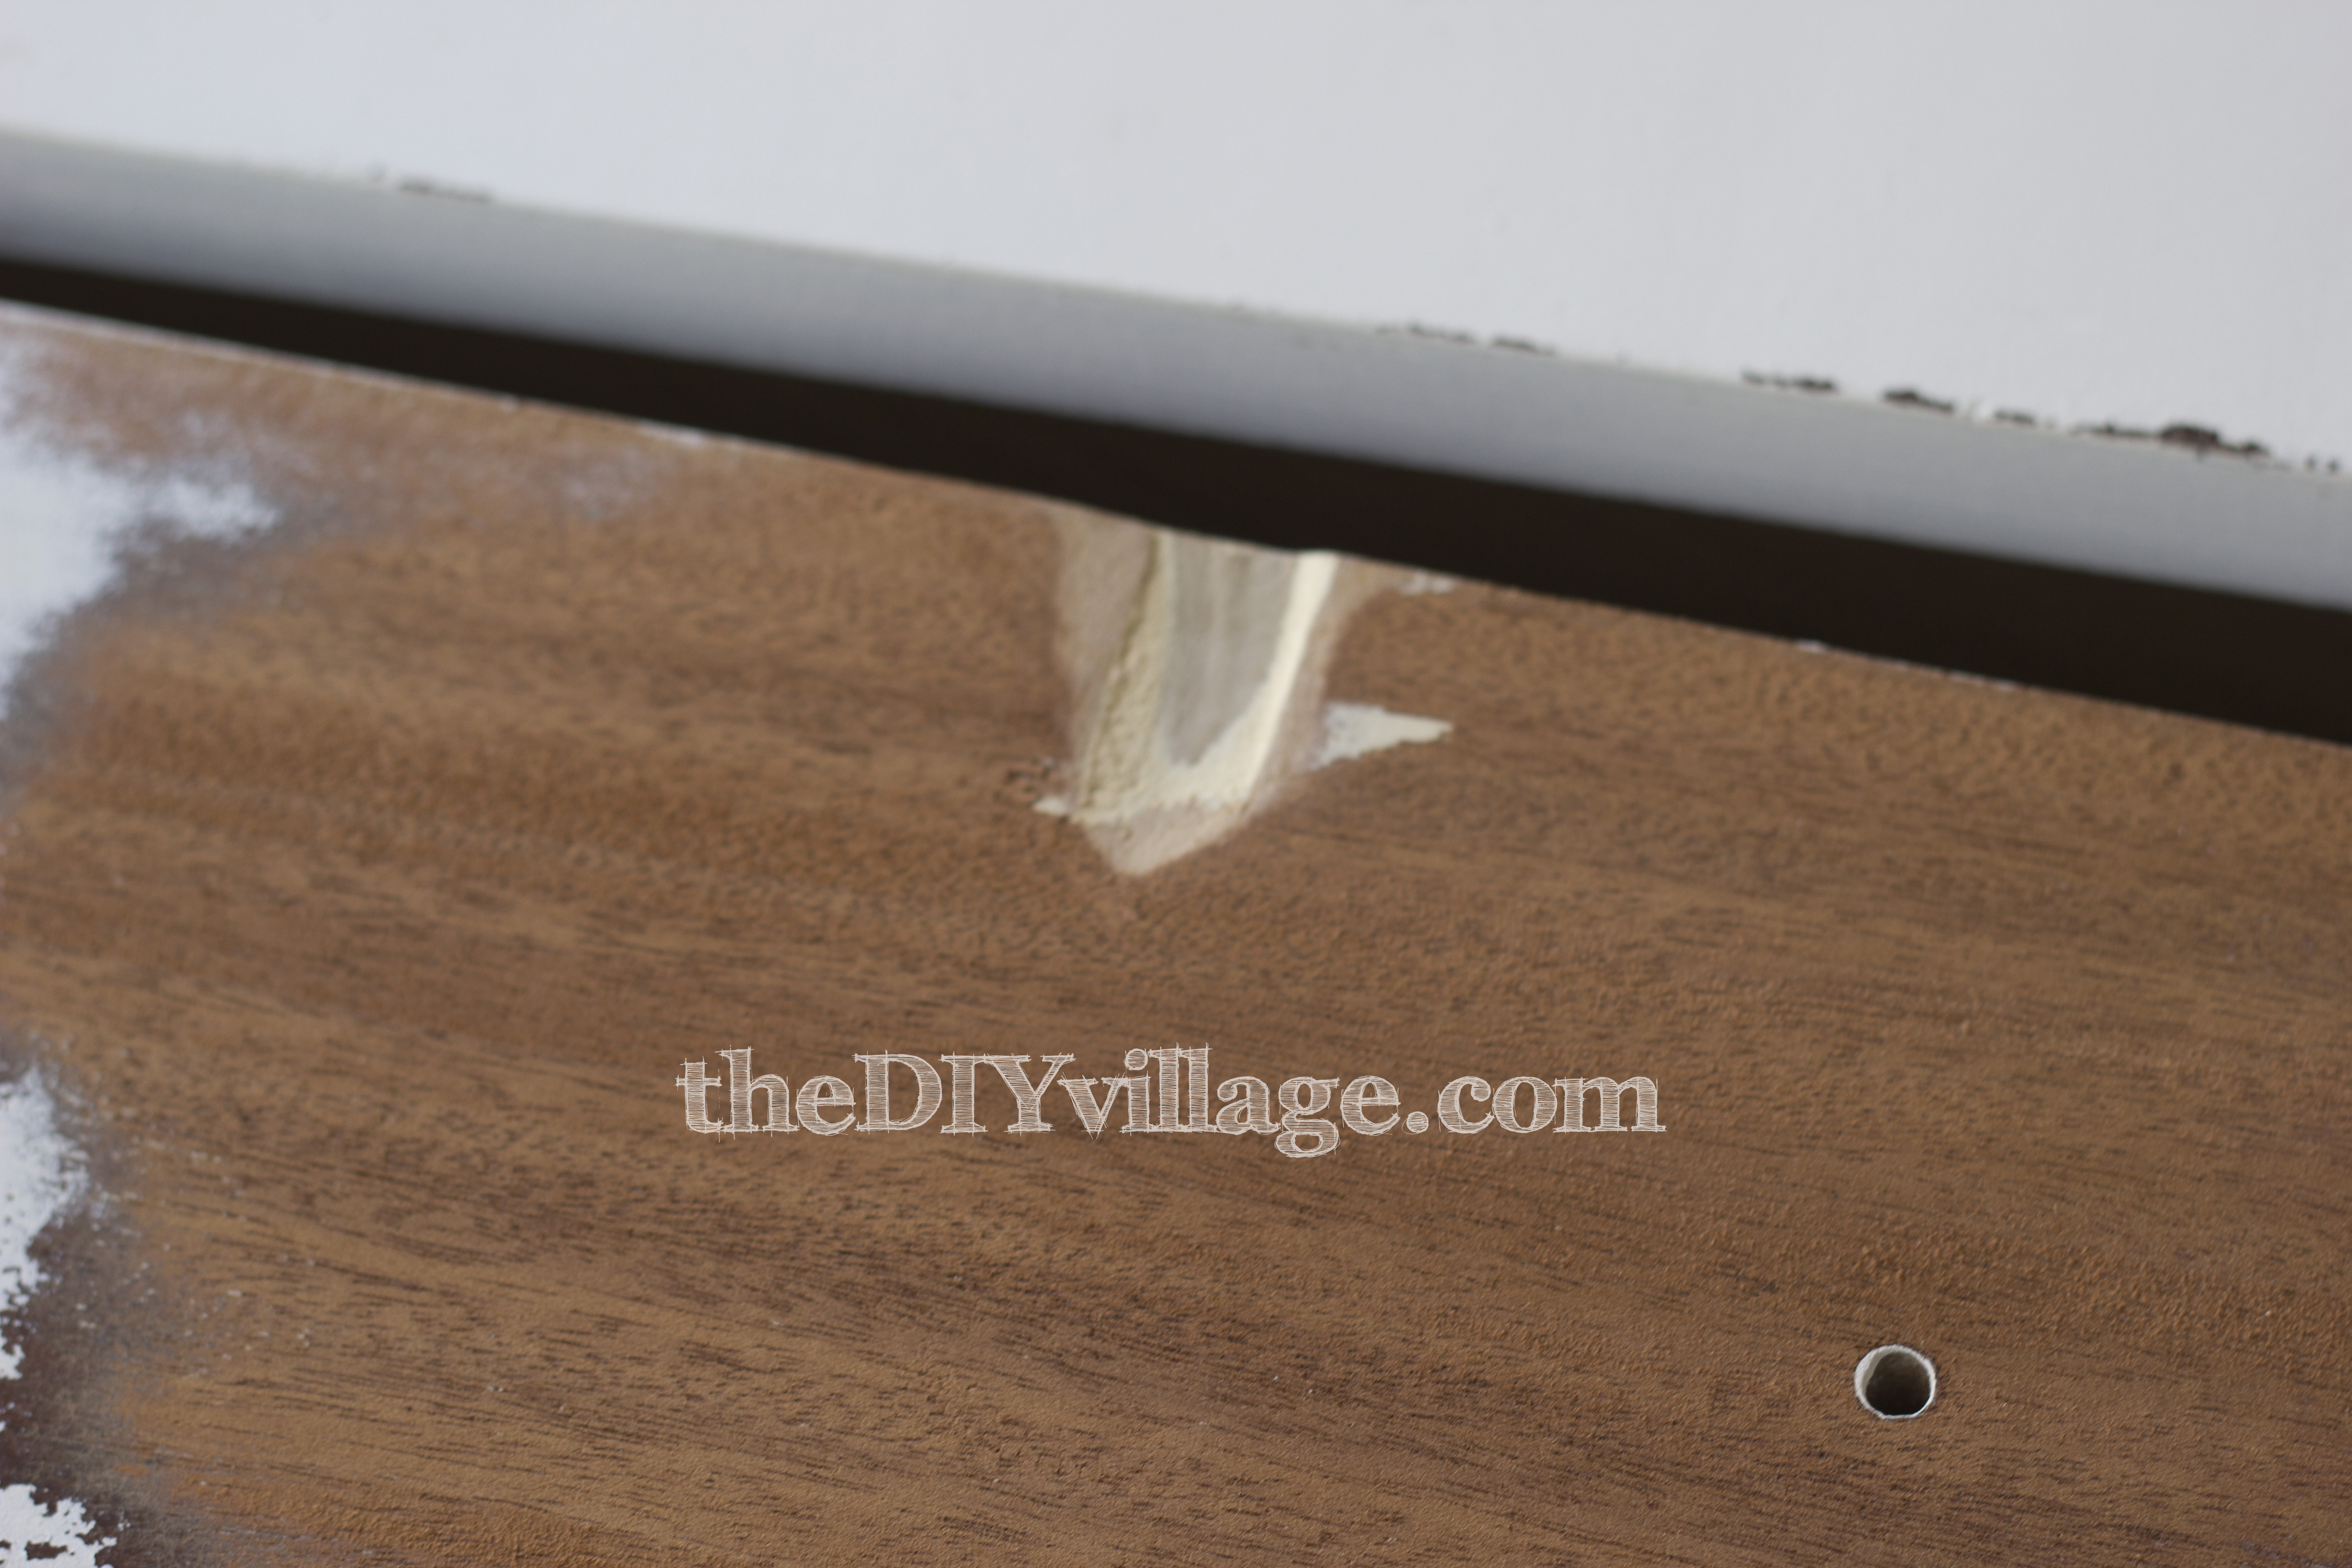 hardwood floor gouge repair of lovely how to fix gouges in wood furniture at how to repair regarding lovely how to fix gouges in wood furniture at how to repair furniture using bondo thediyvillage